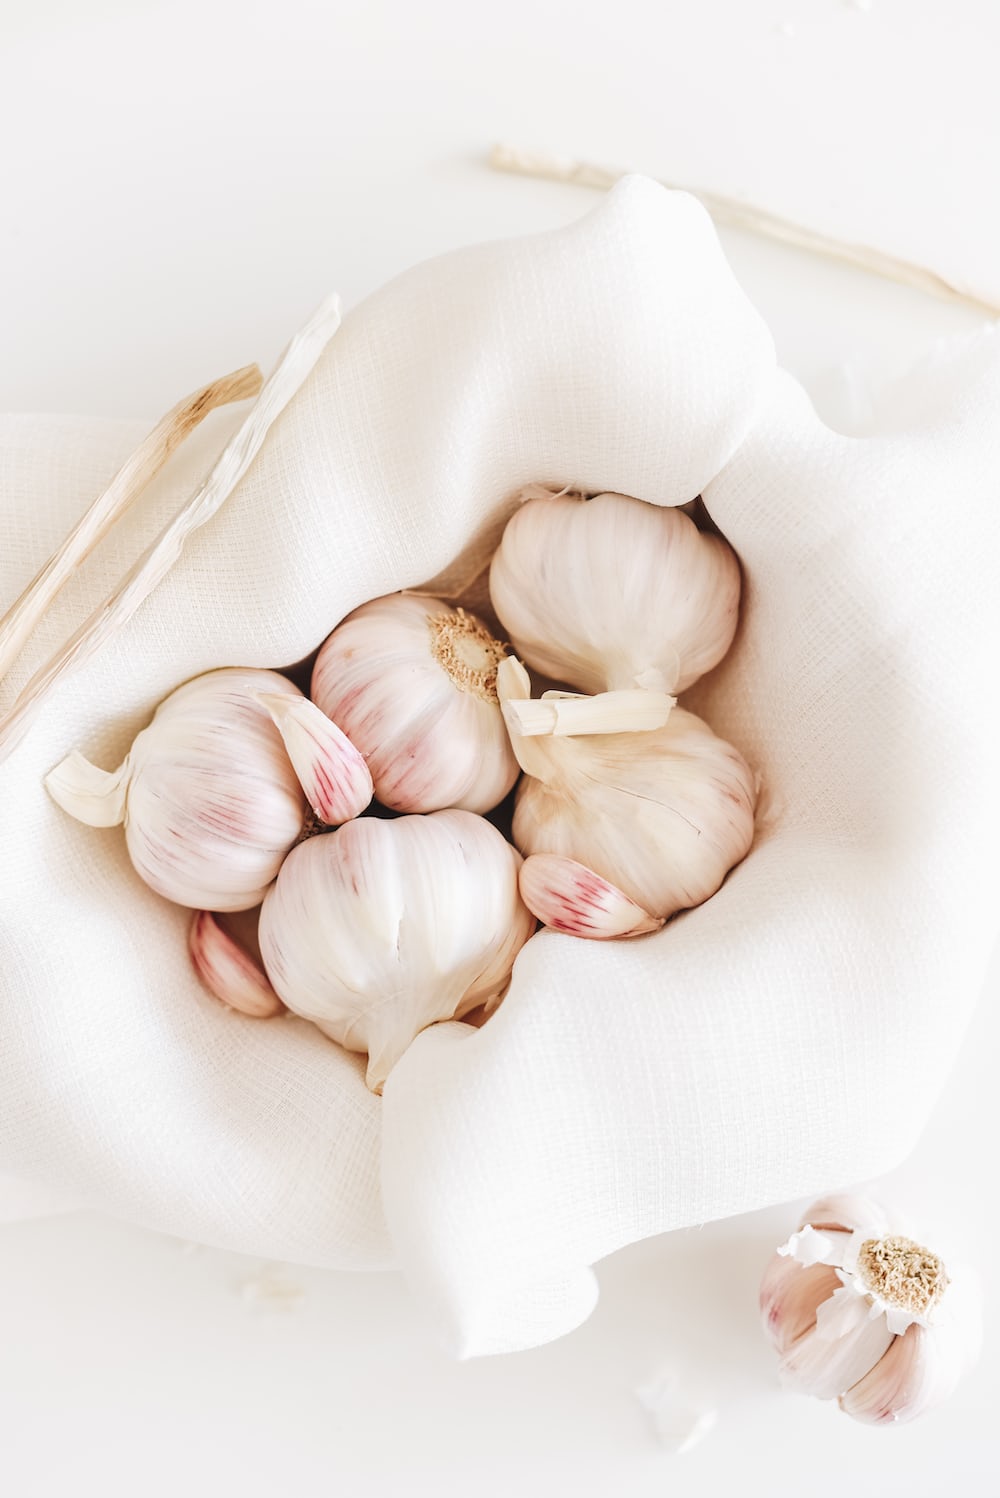 Garlic: The Superfood That Boosts Your Immune System and Fights Disease